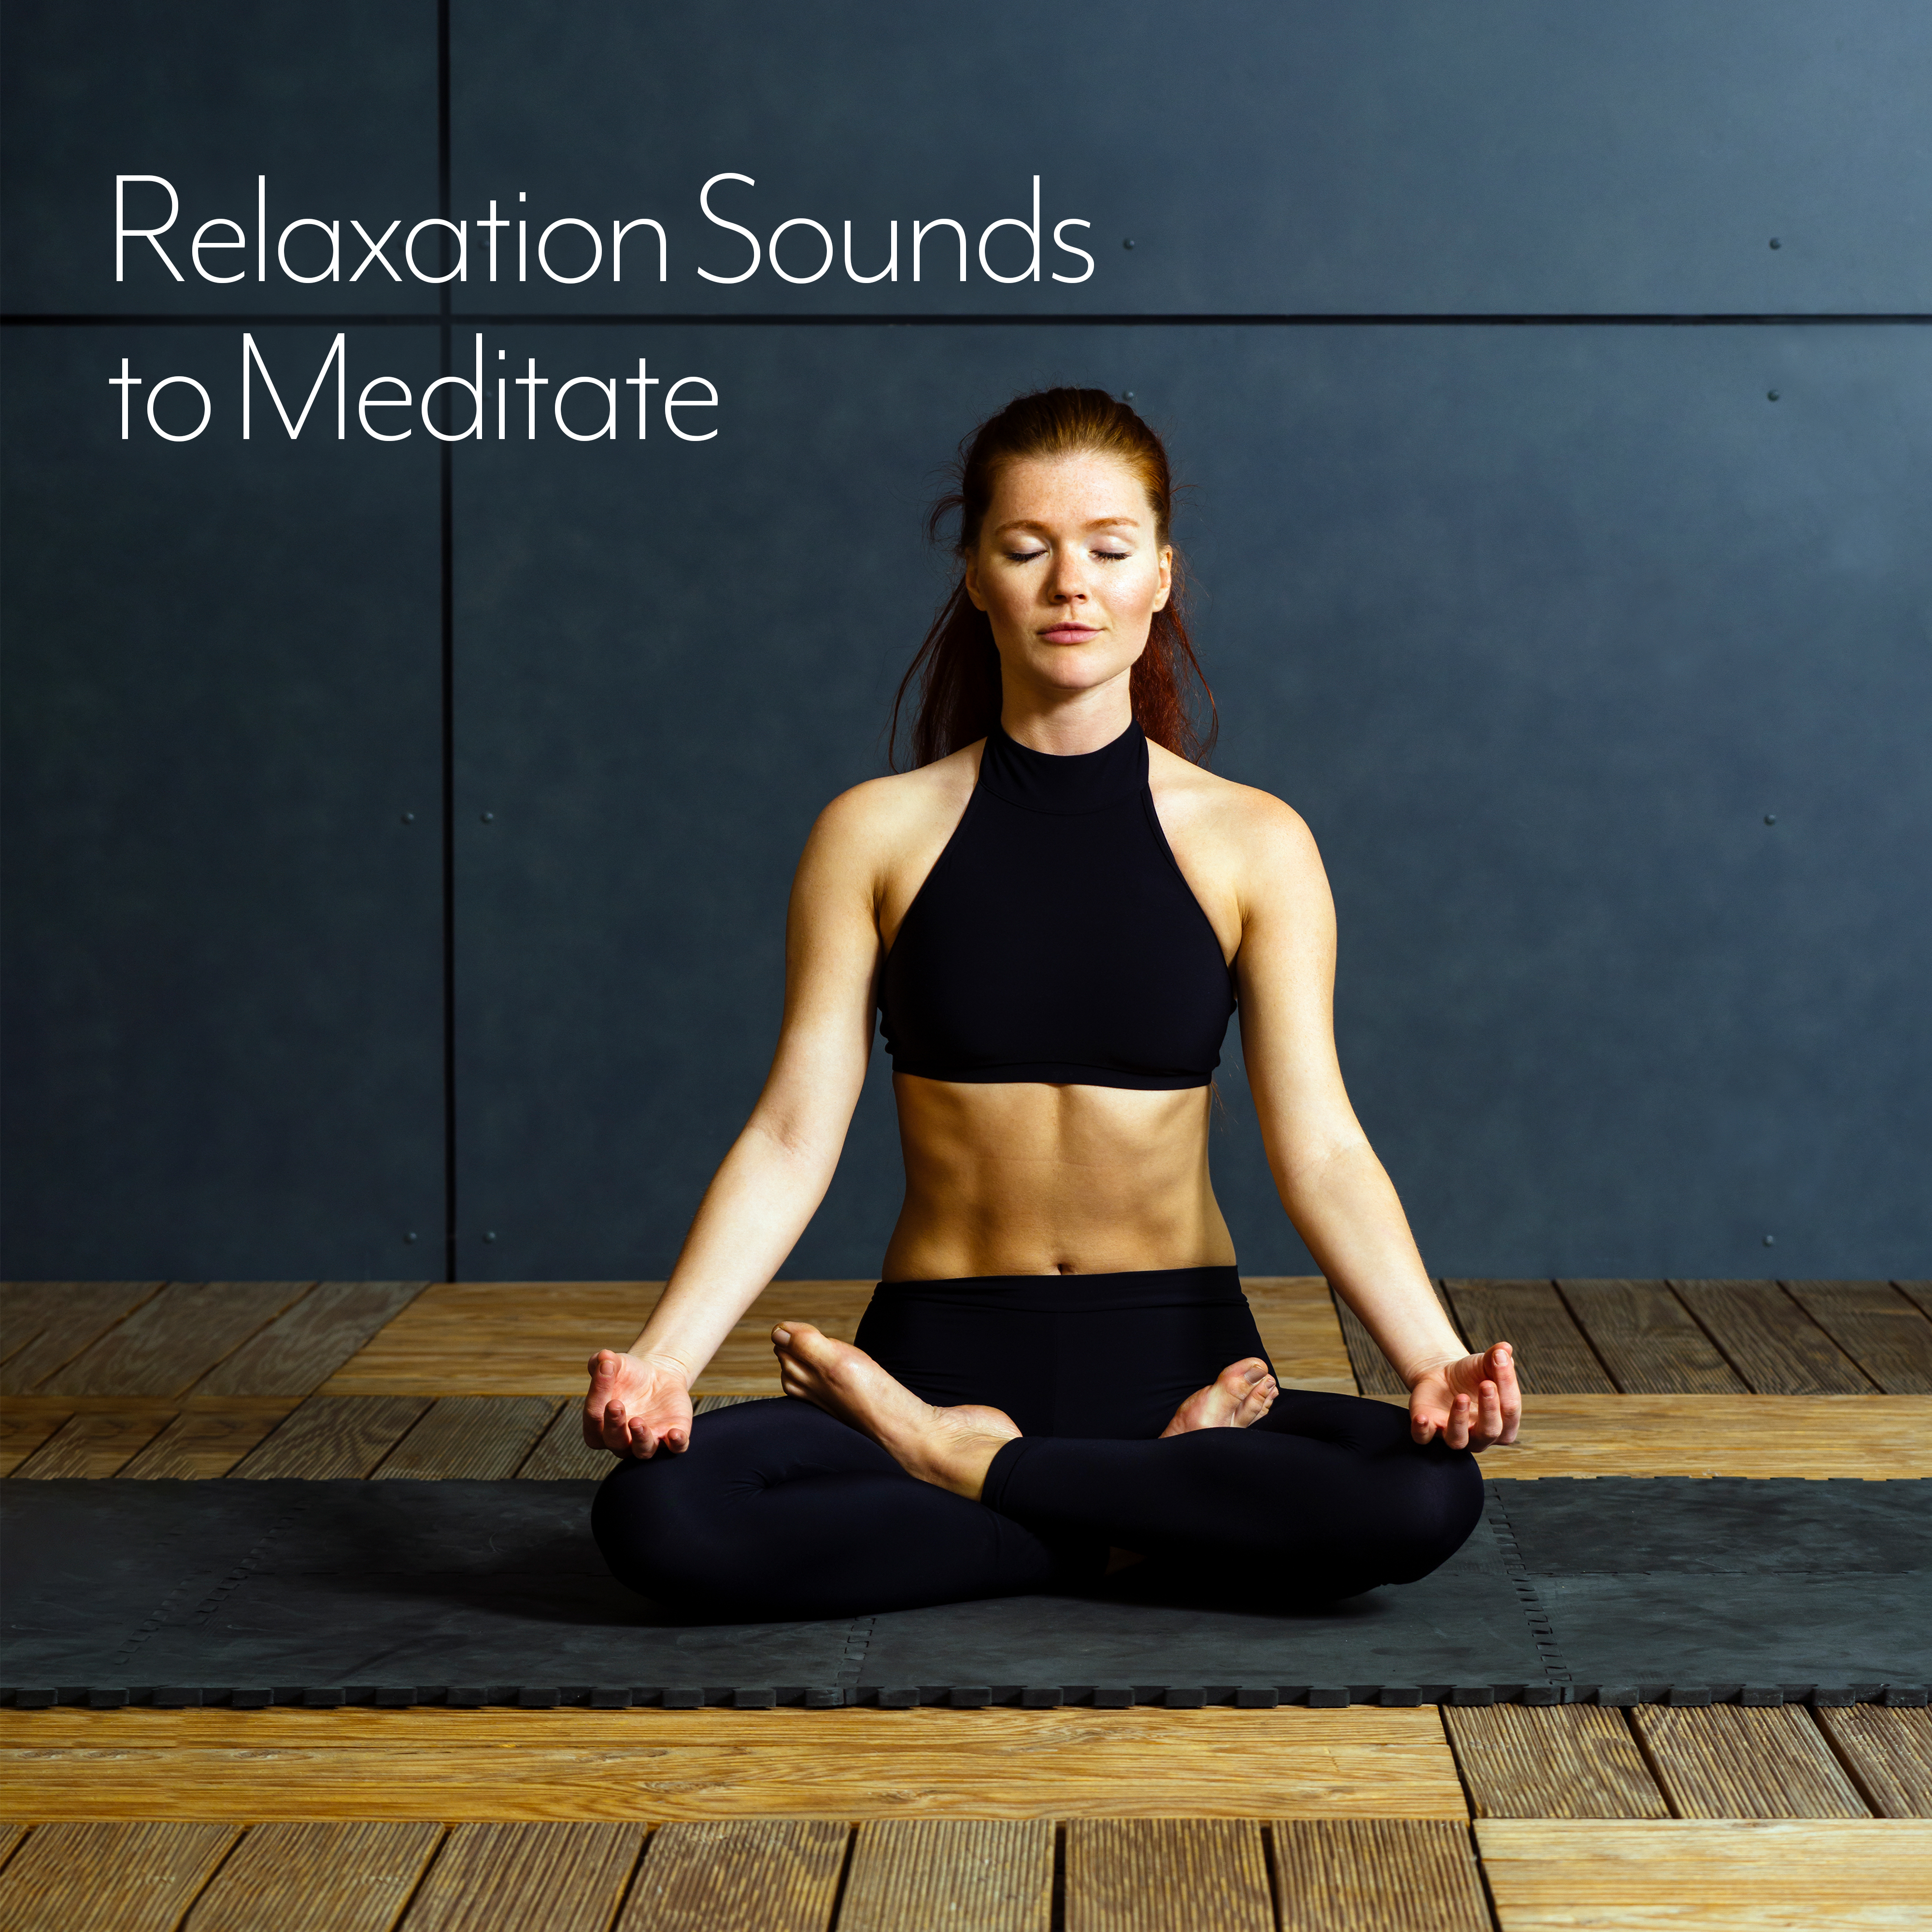 Relaxation Sounds to Meditate